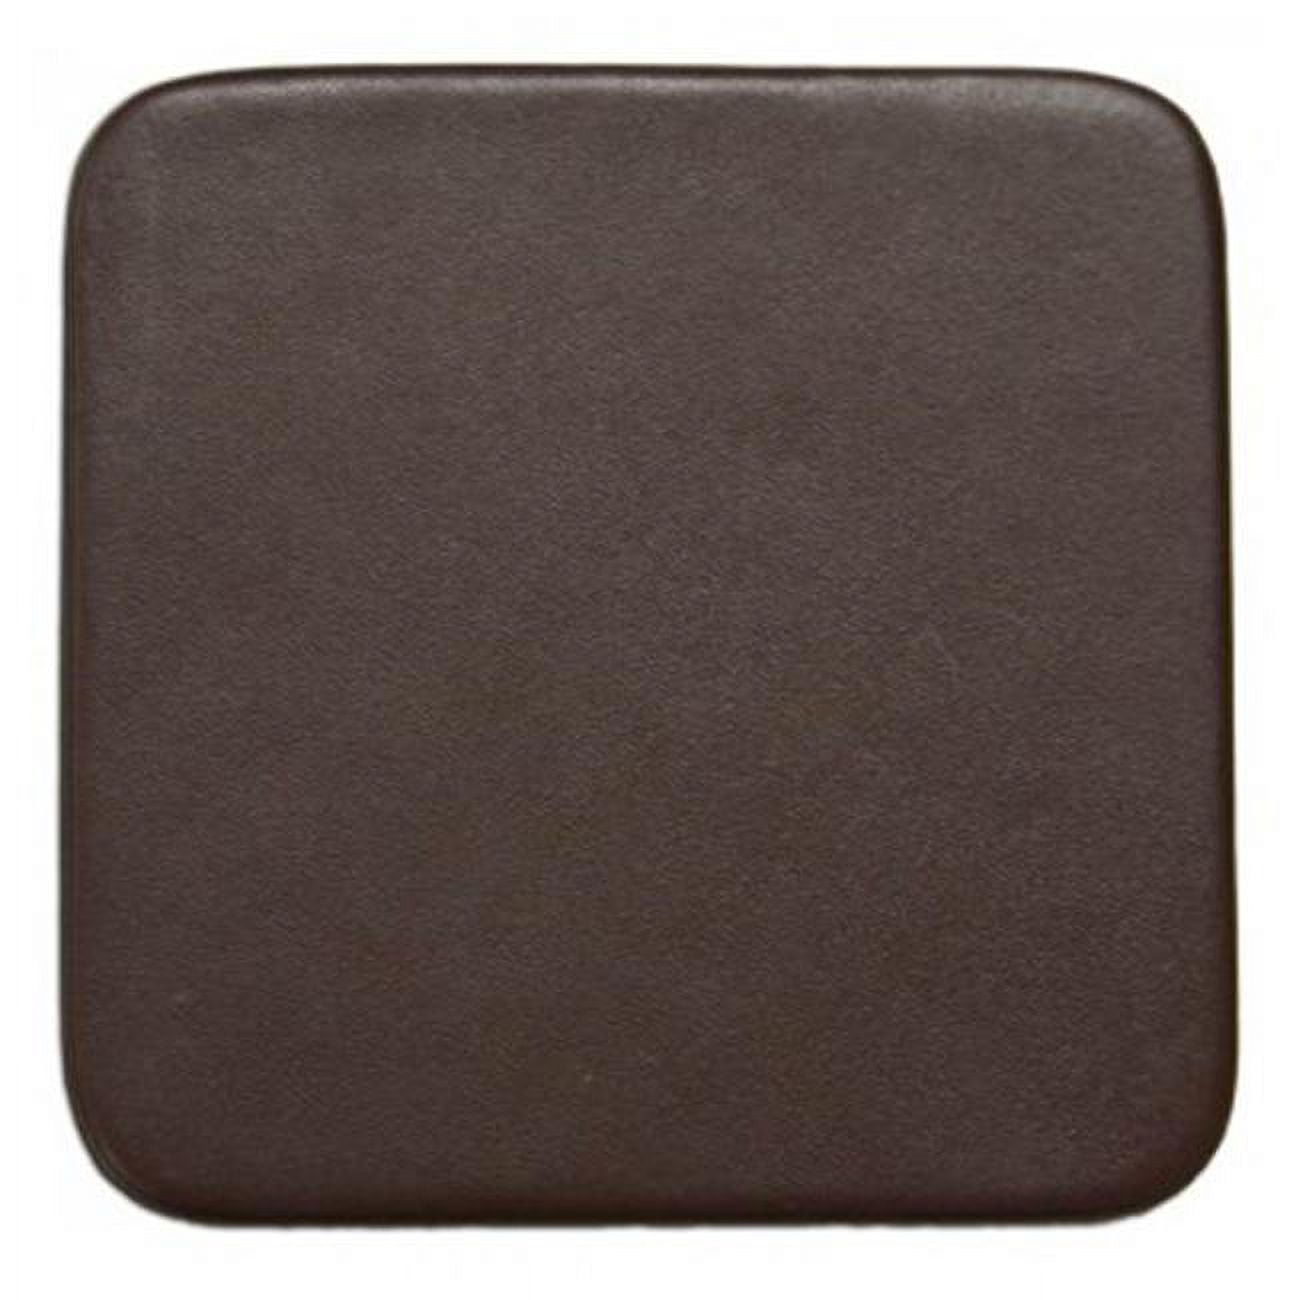 Chocolate Brown Leatherette Square Coaster